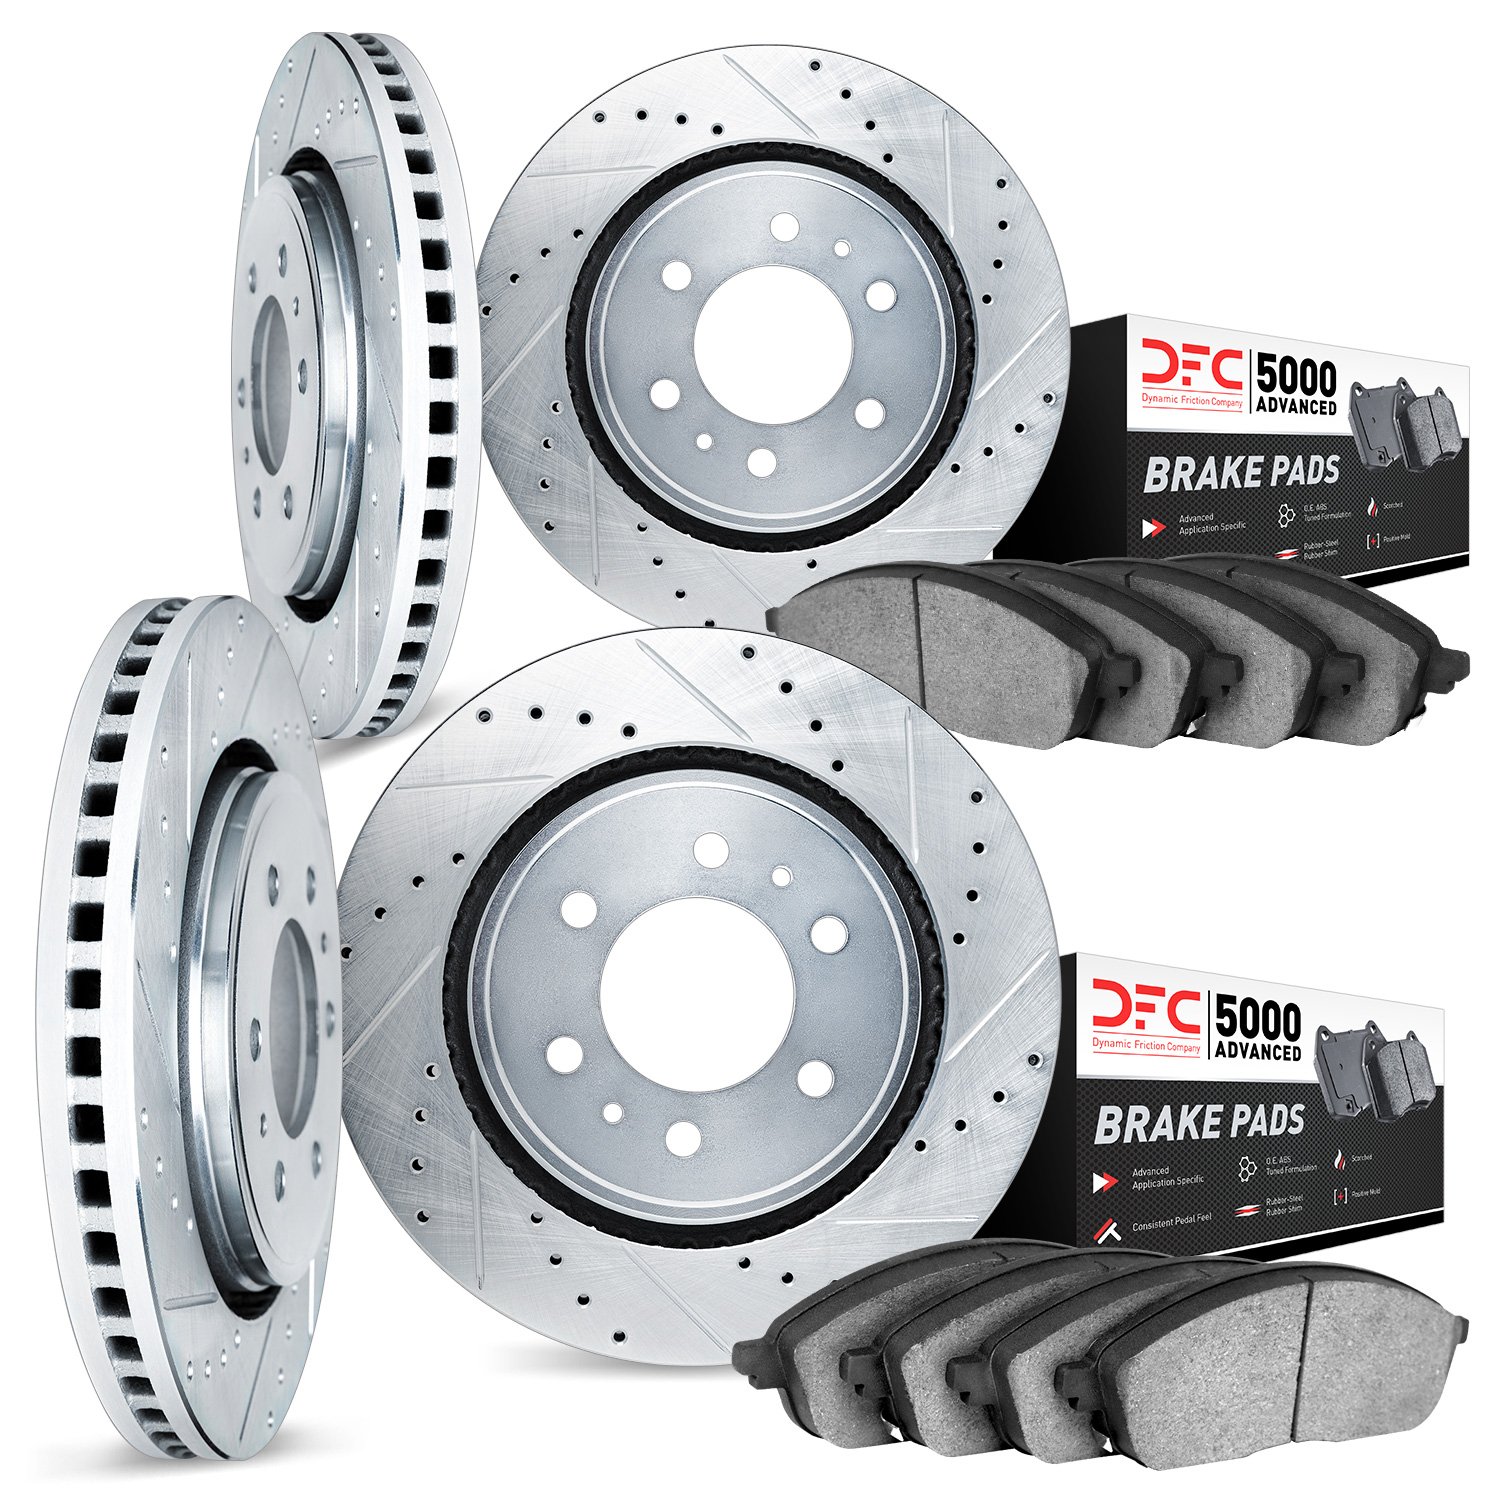 7504-46046 Drilled/Slotted Brake Rotors w/5000 Advanced Brake Pads Kit [Silver], 2010-2016 GM, Position: Front and Rear